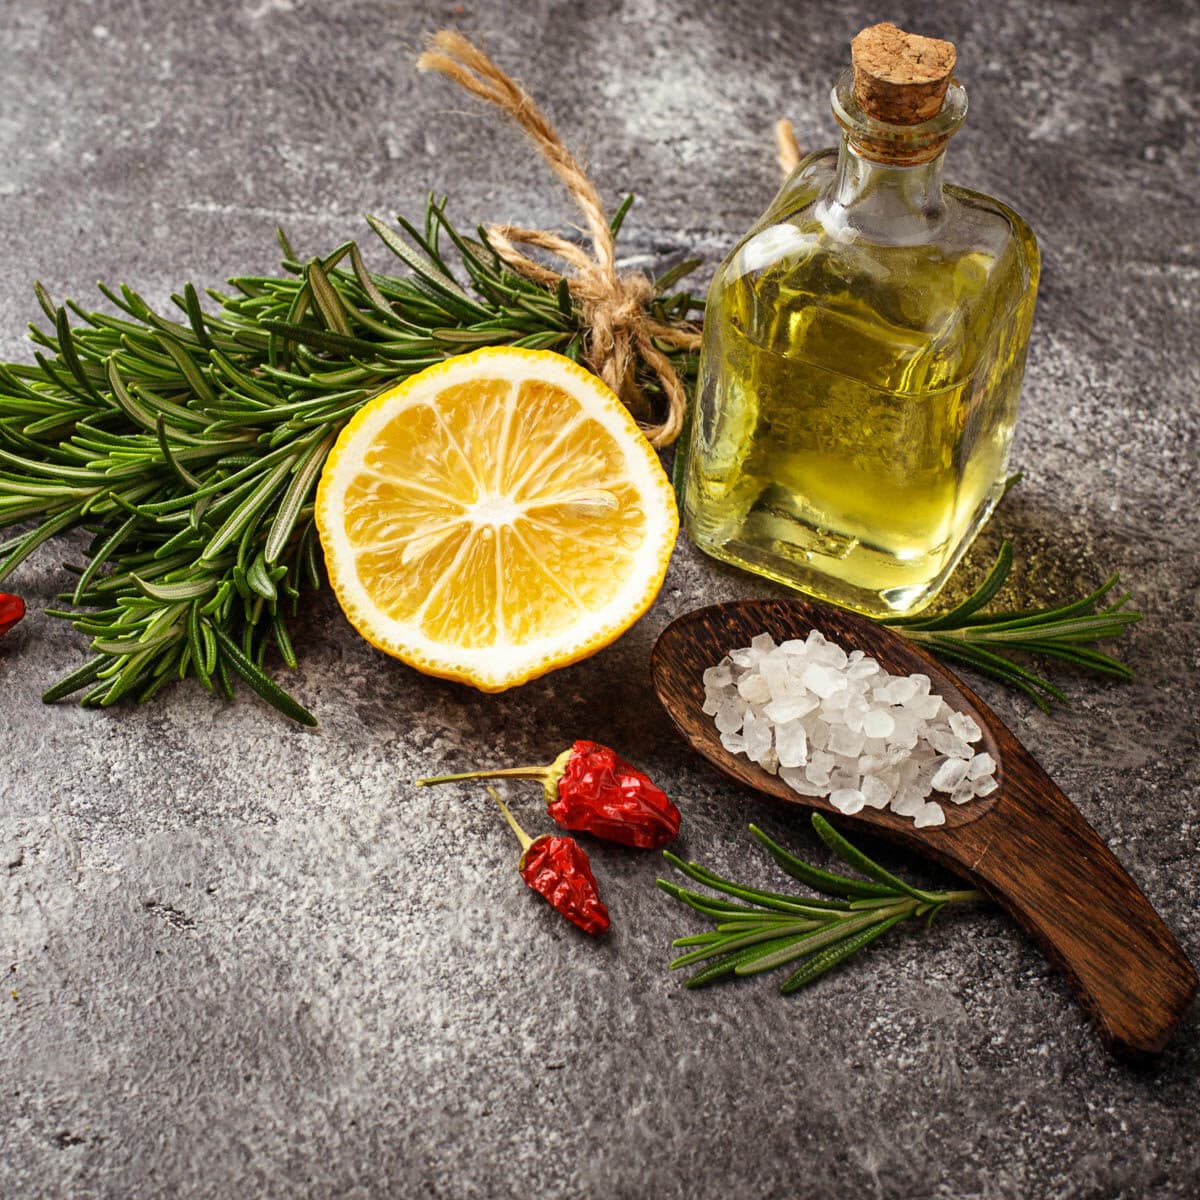 Ingredients to balance favor including, lemons, oil, salt, rosemary and dried pepper on a concrete counter.